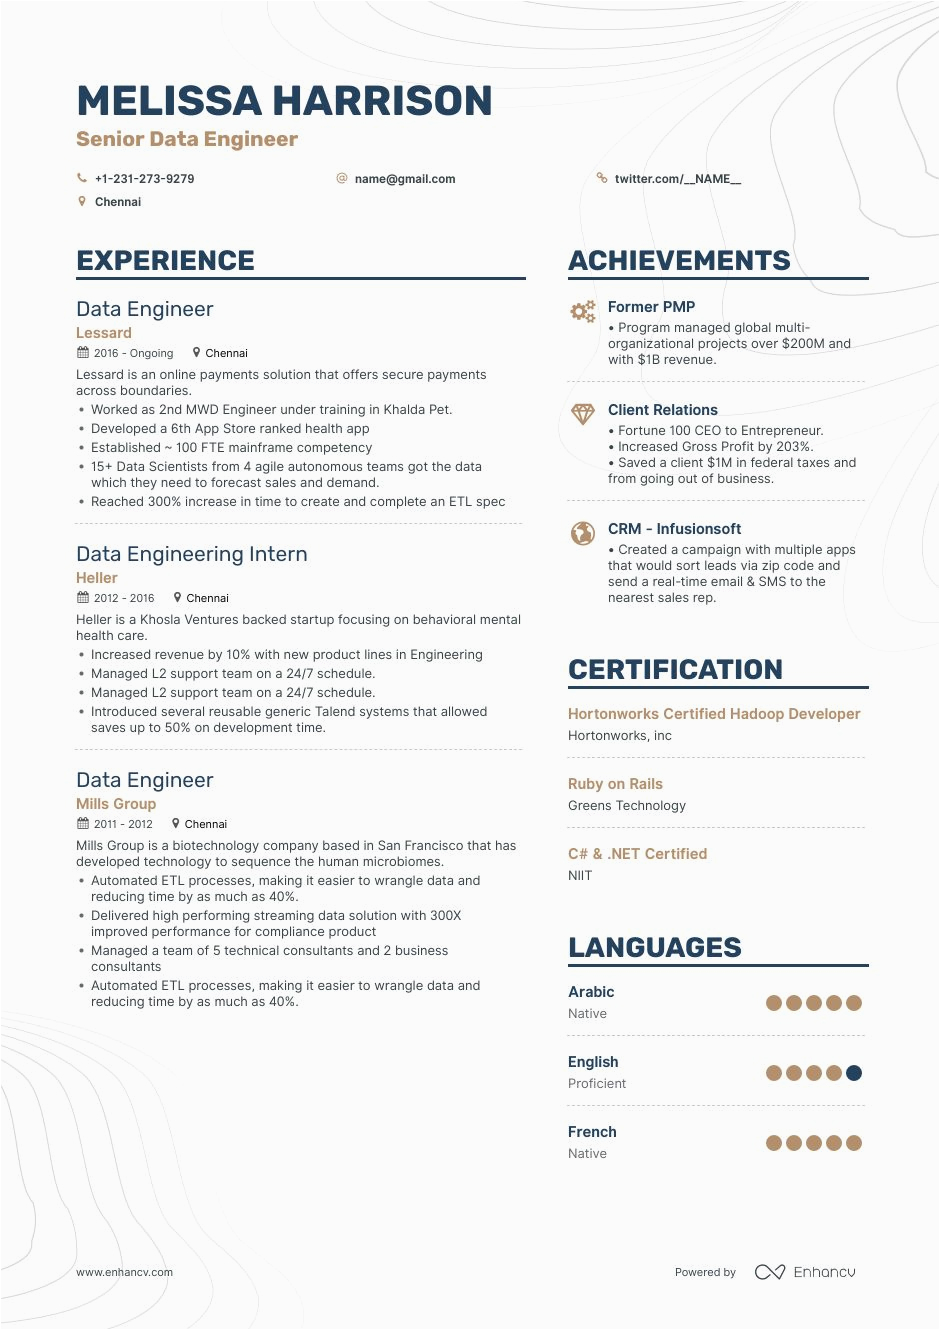 Big Data Engineer Entry Level Sample Resumes Data Scientist Resume Samples A Step by Step Guide for 2020